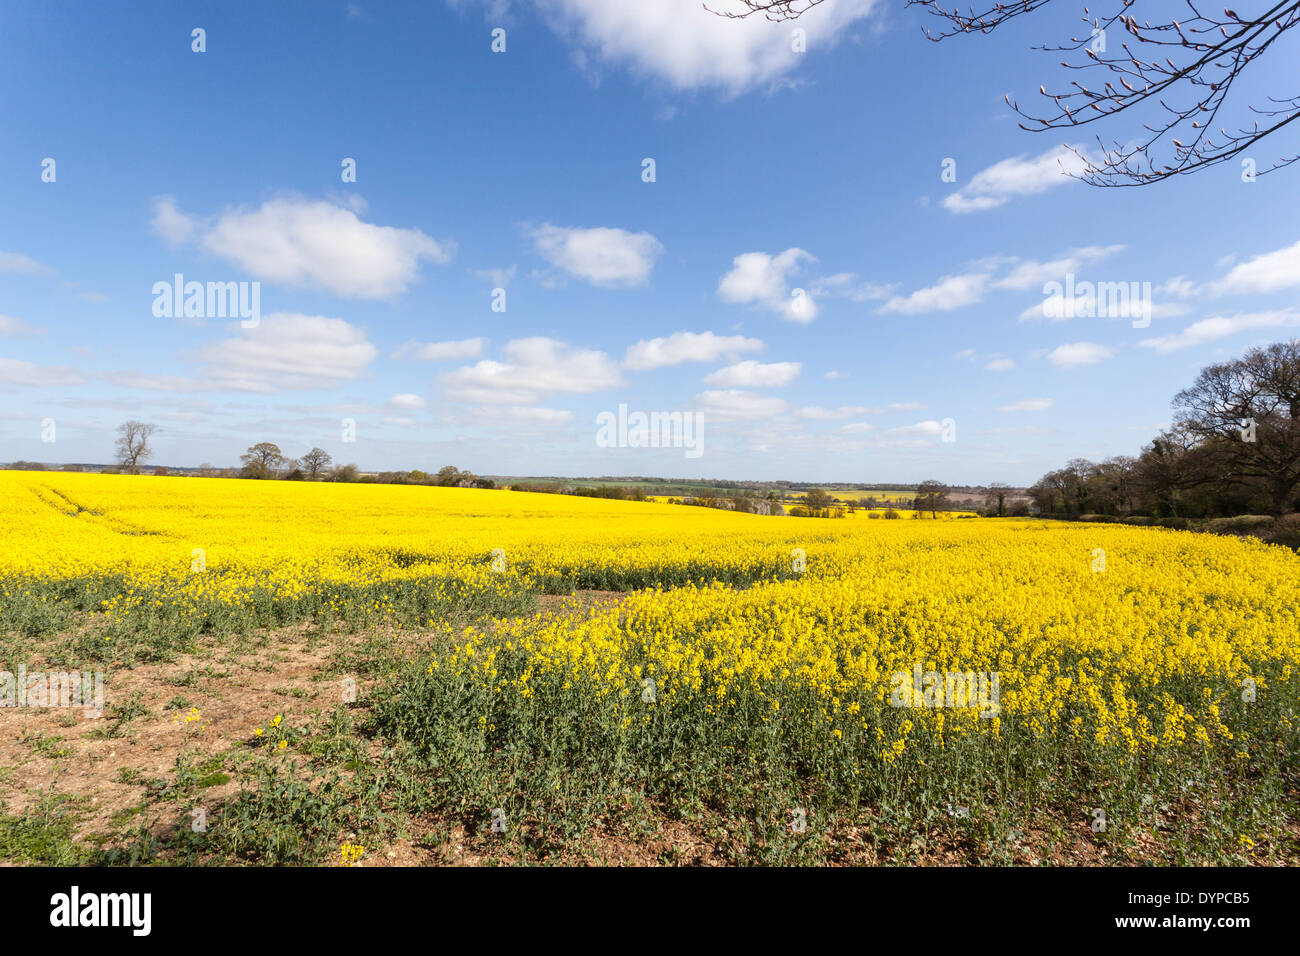 The intense yellow flowers of a rapeseed field against the blue sky, St Albans, Hertfordshire, England, UK. Stock Photo